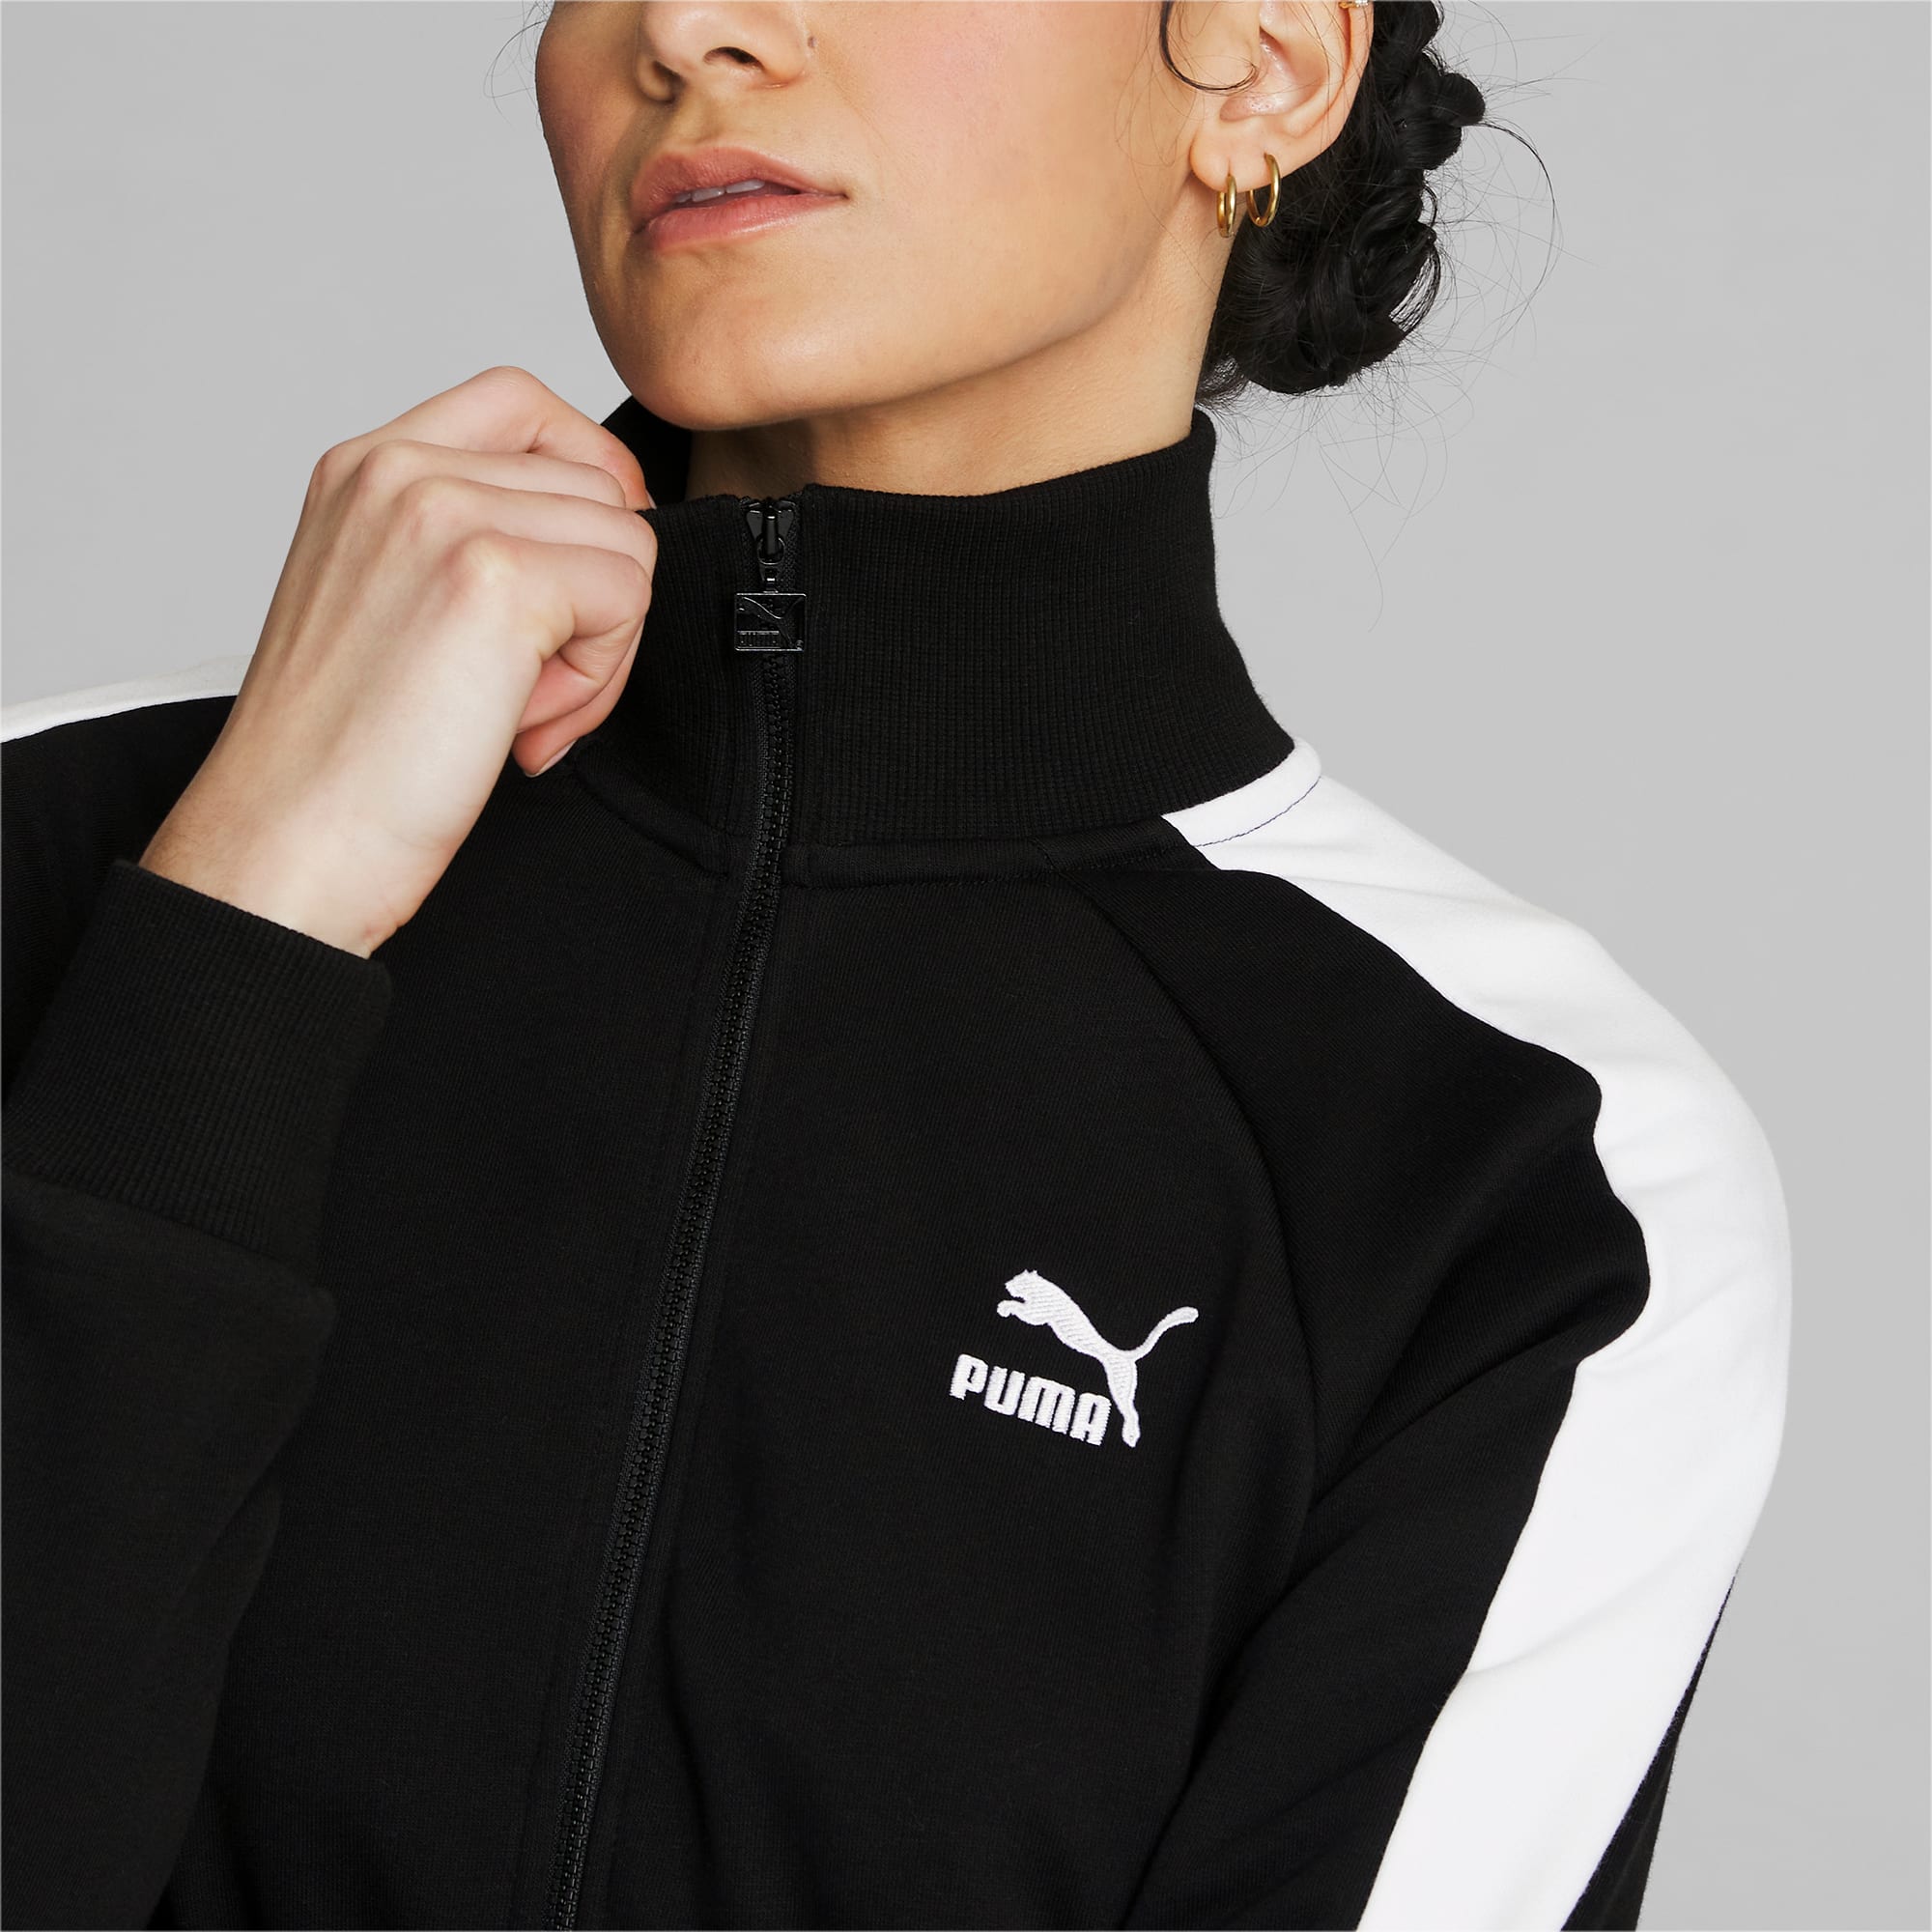 PUMA T7 Archive Remaster Jacket perfect for keeping your style simple. This  contemporary take on classic PUMA design⁠ ✨ ⁠ Get the l